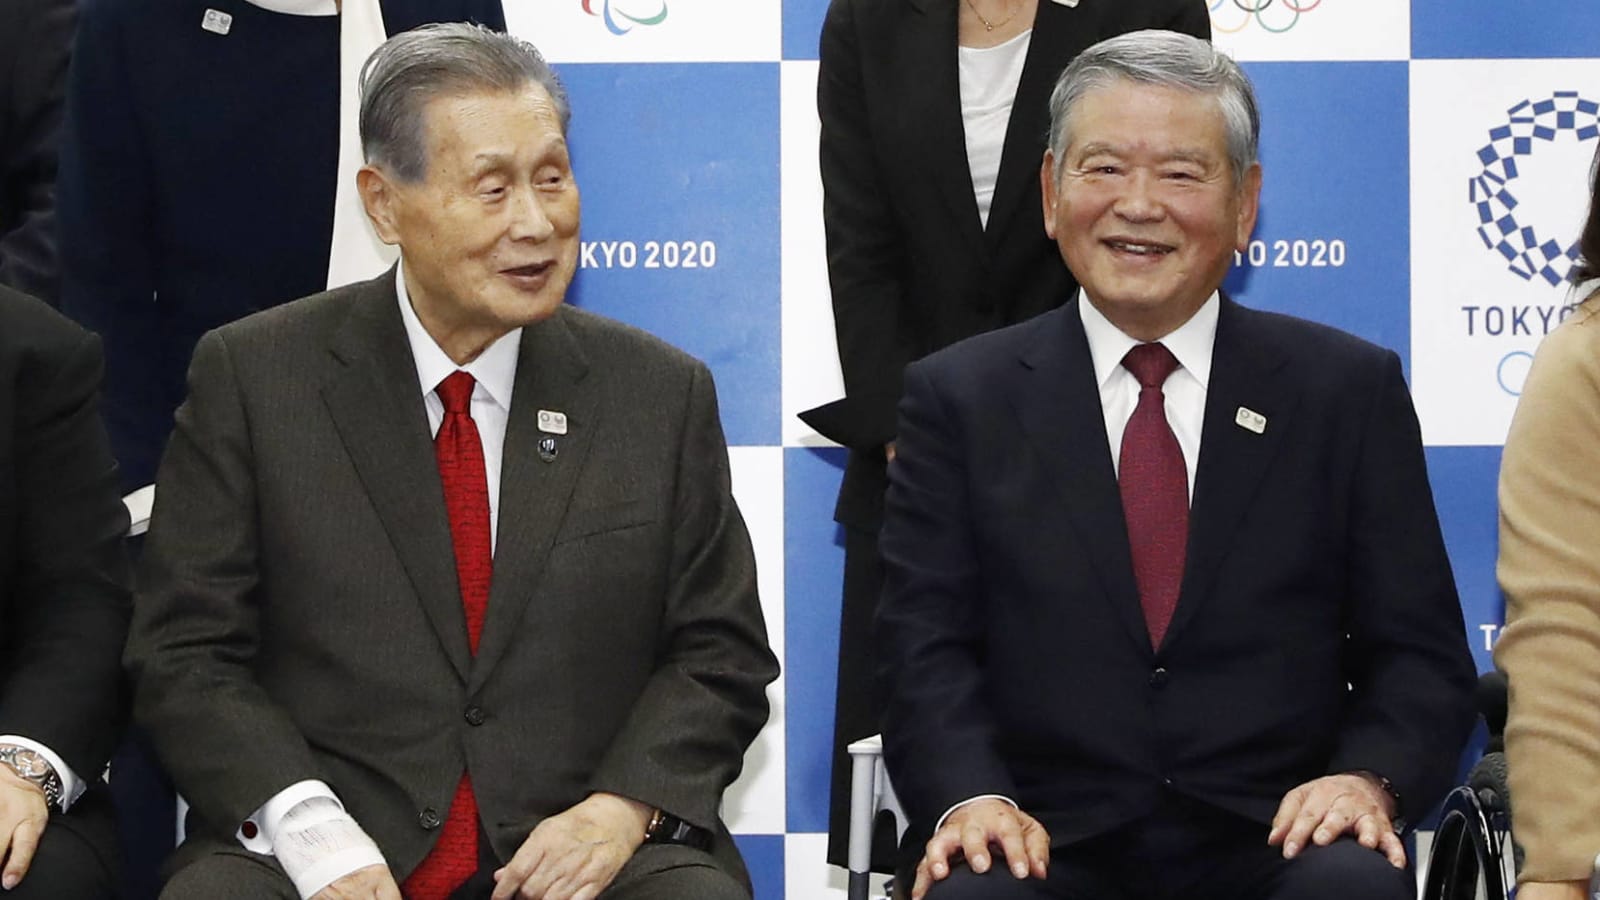 Tokyo Olympics president to resign following sexist comments